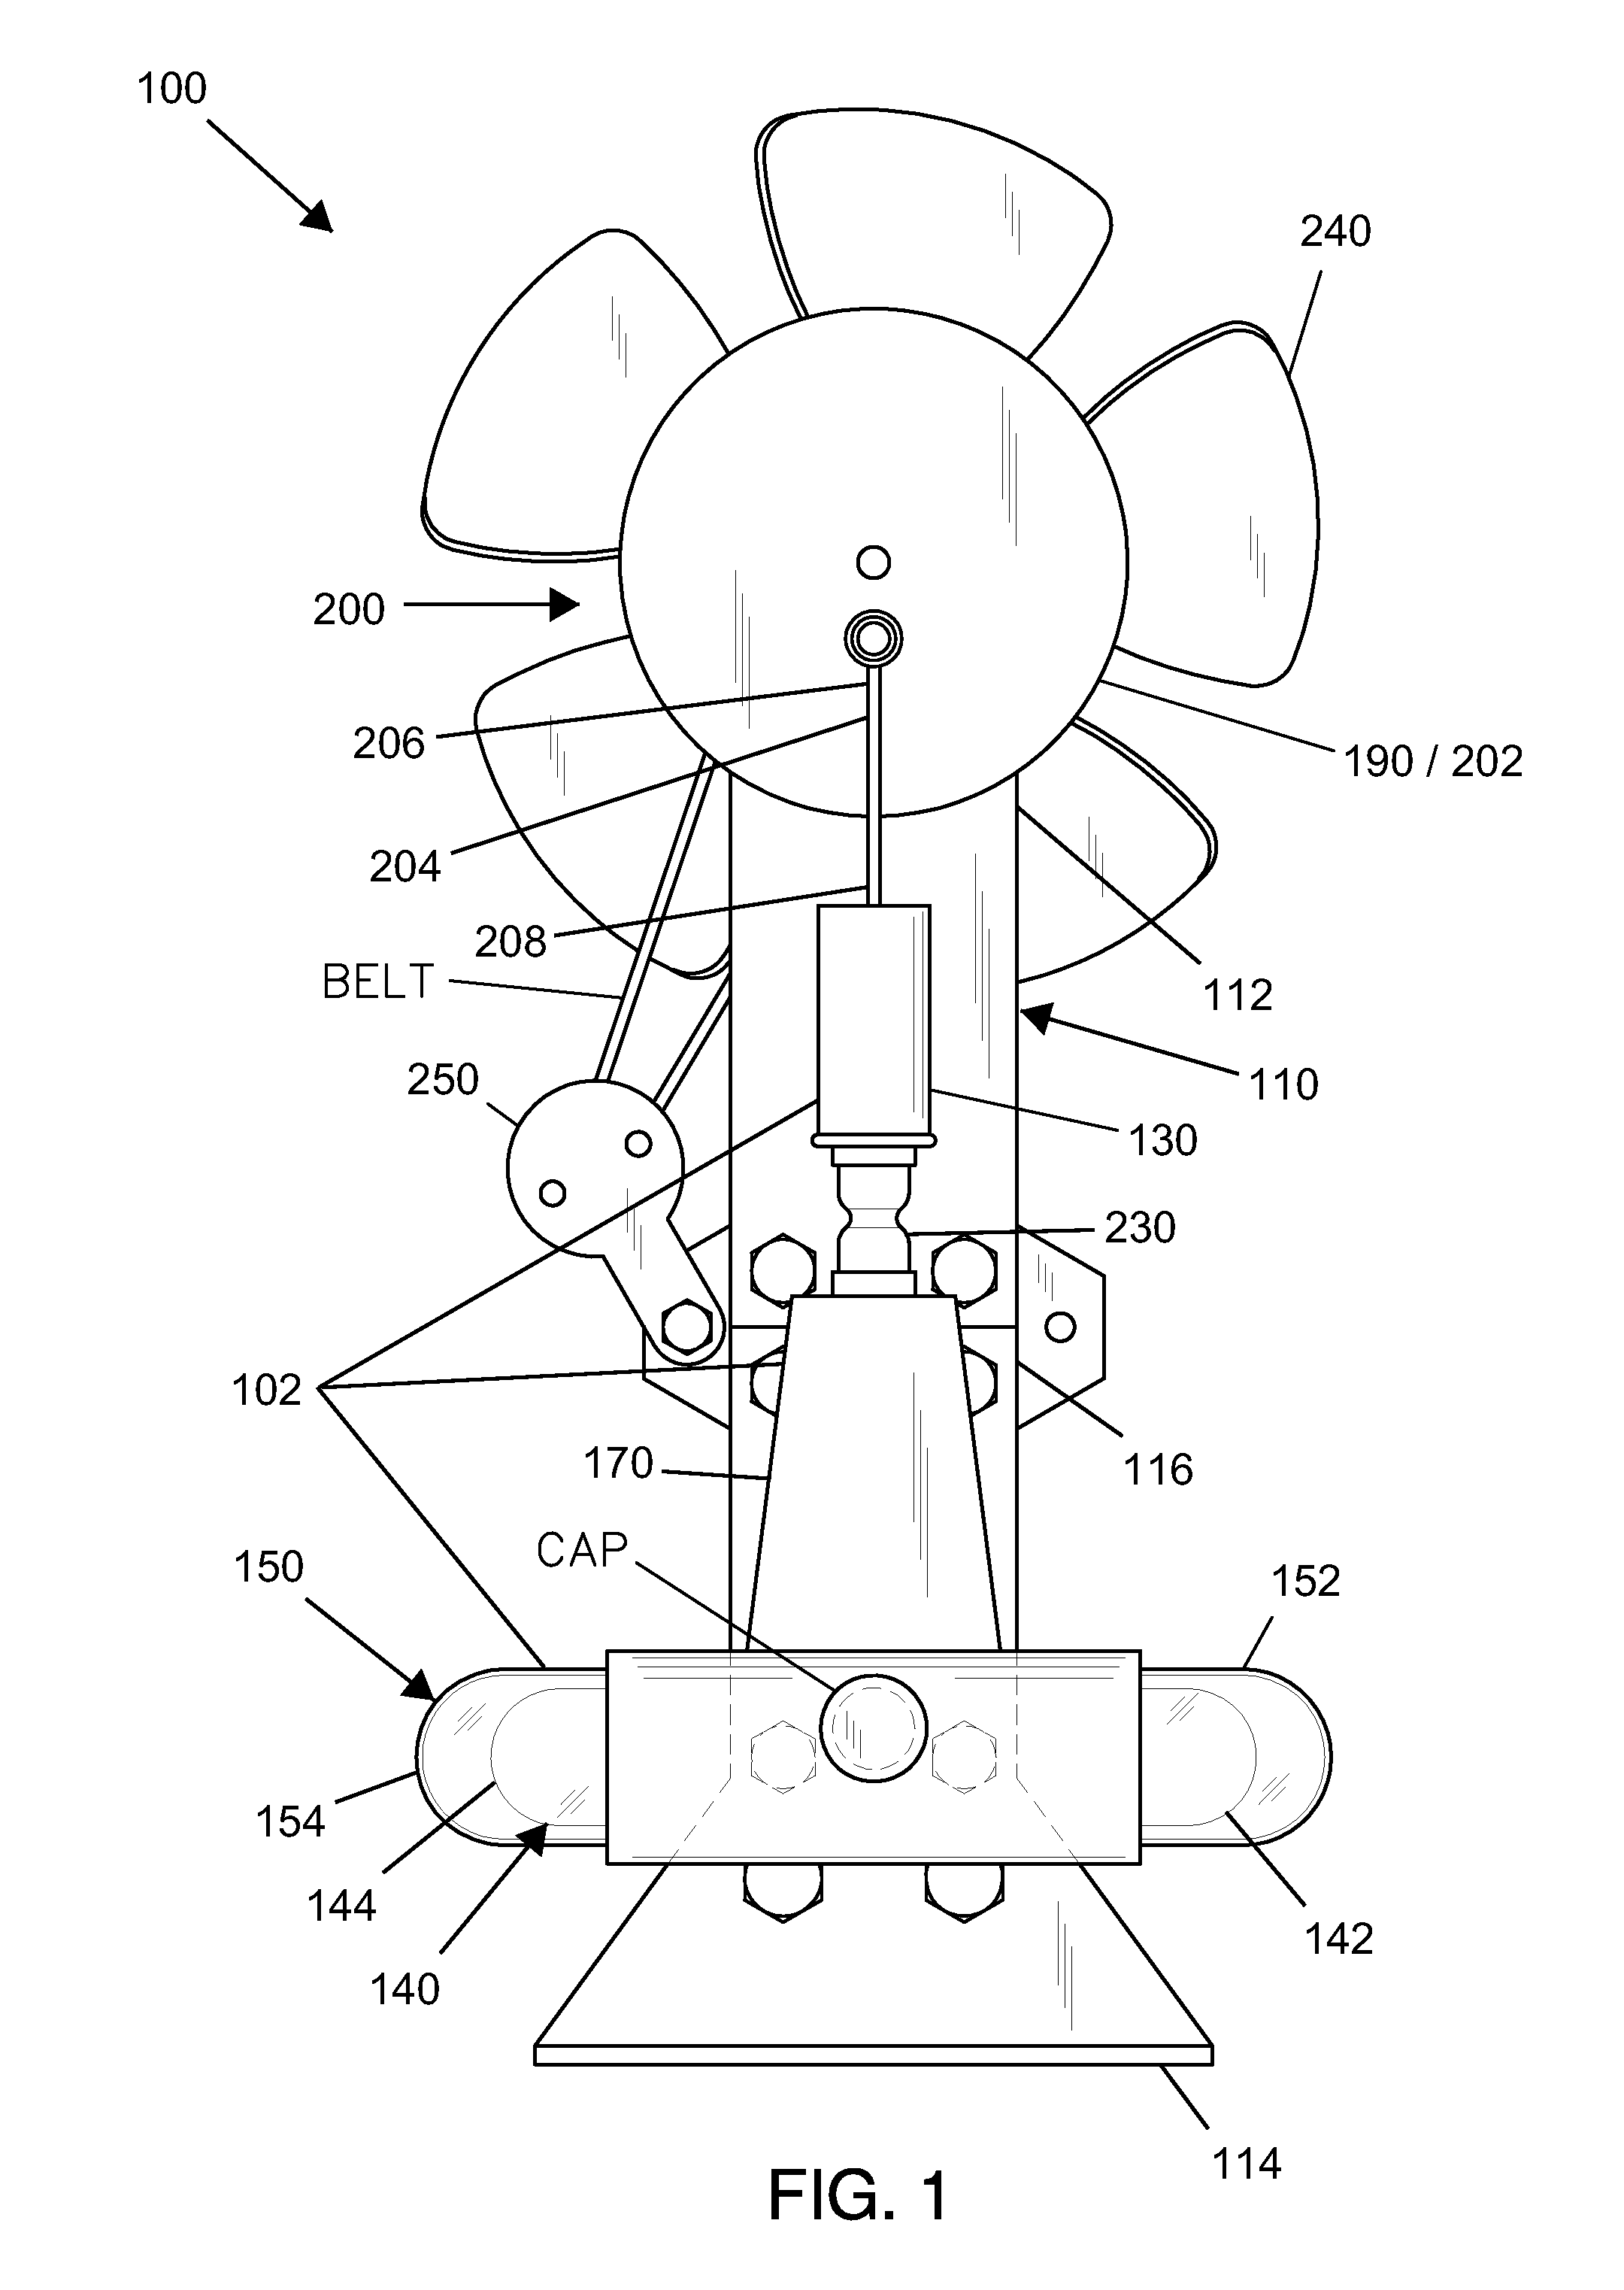 Directionally reversible hot air engine system